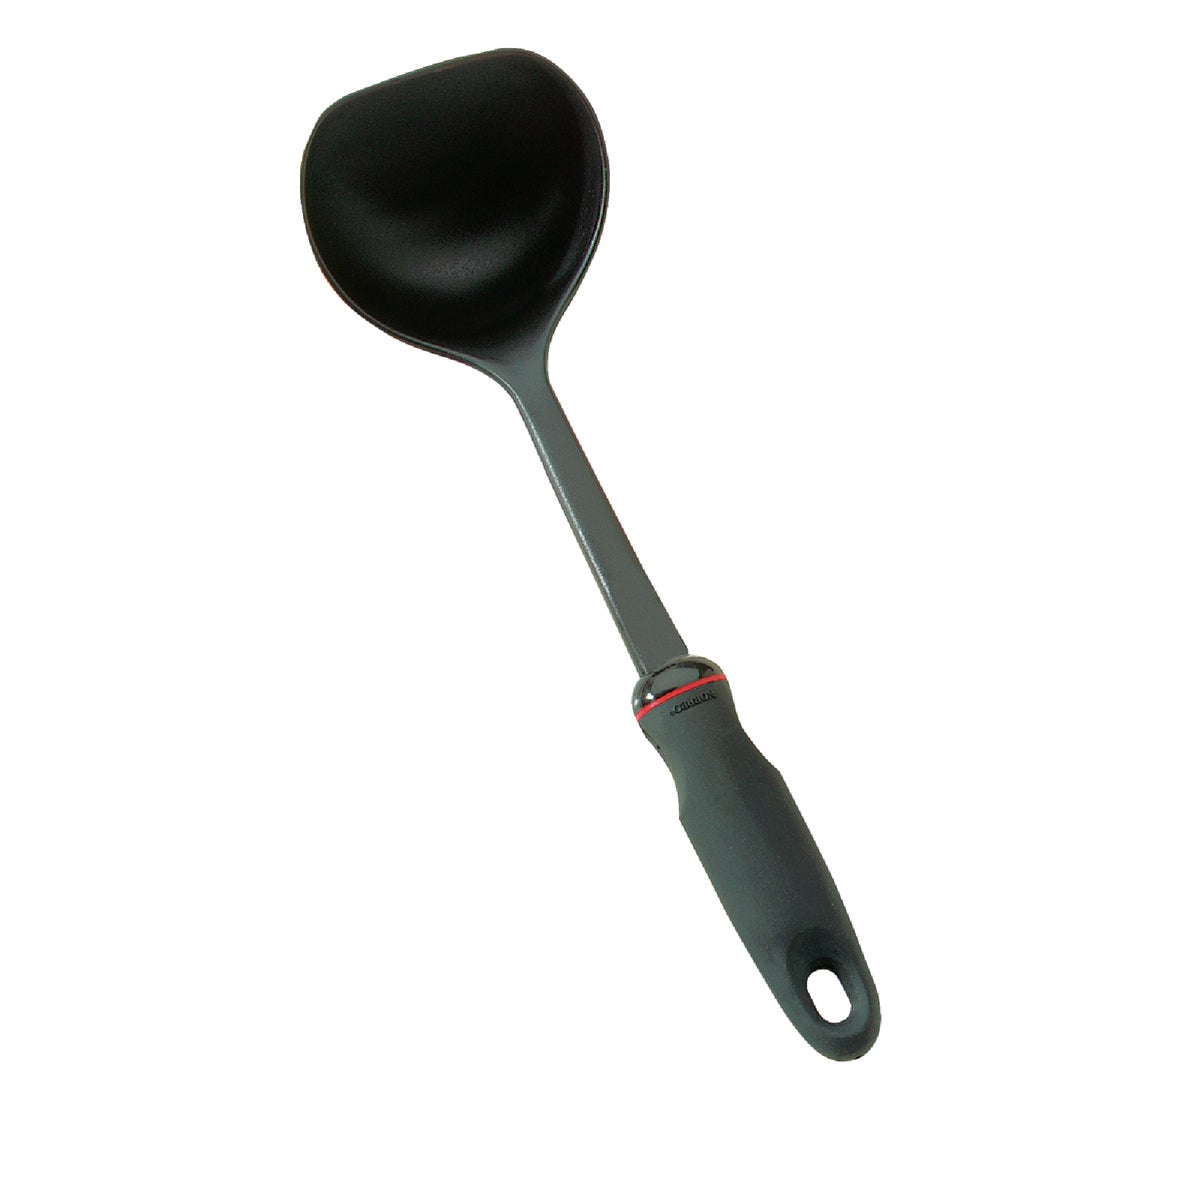 Item 630993, Black nylon ladle for use in serving soups and stews.